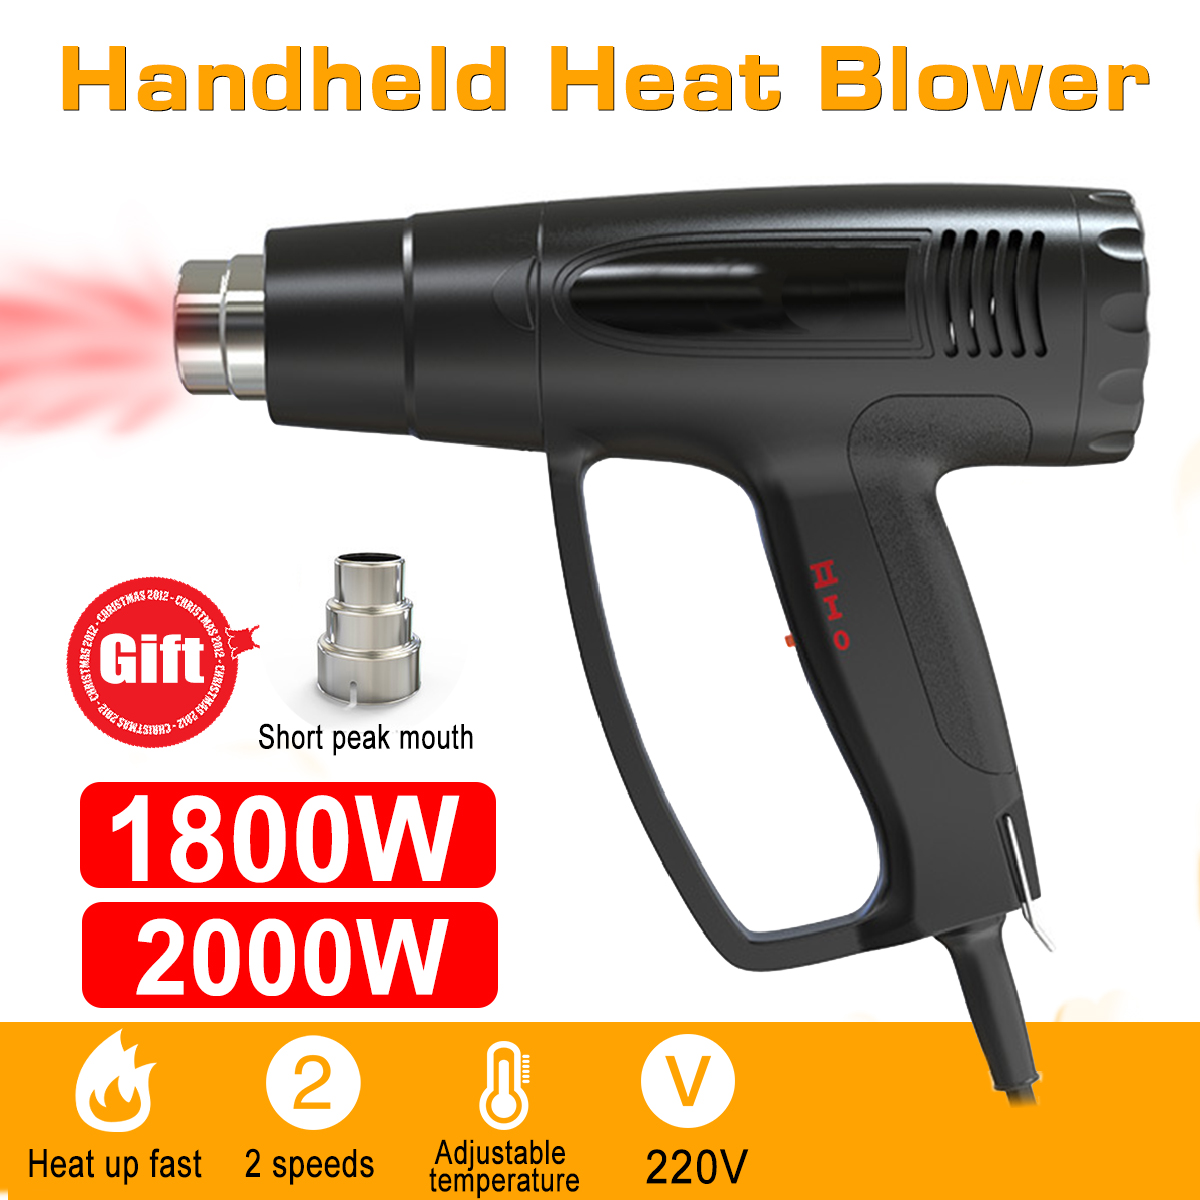 1800W-2000W-220V-Fast-Heating-Heat-Hot-Air-Rework-Station-Powered-600-Dual-Temperature-with-Nozzles-1628664-1